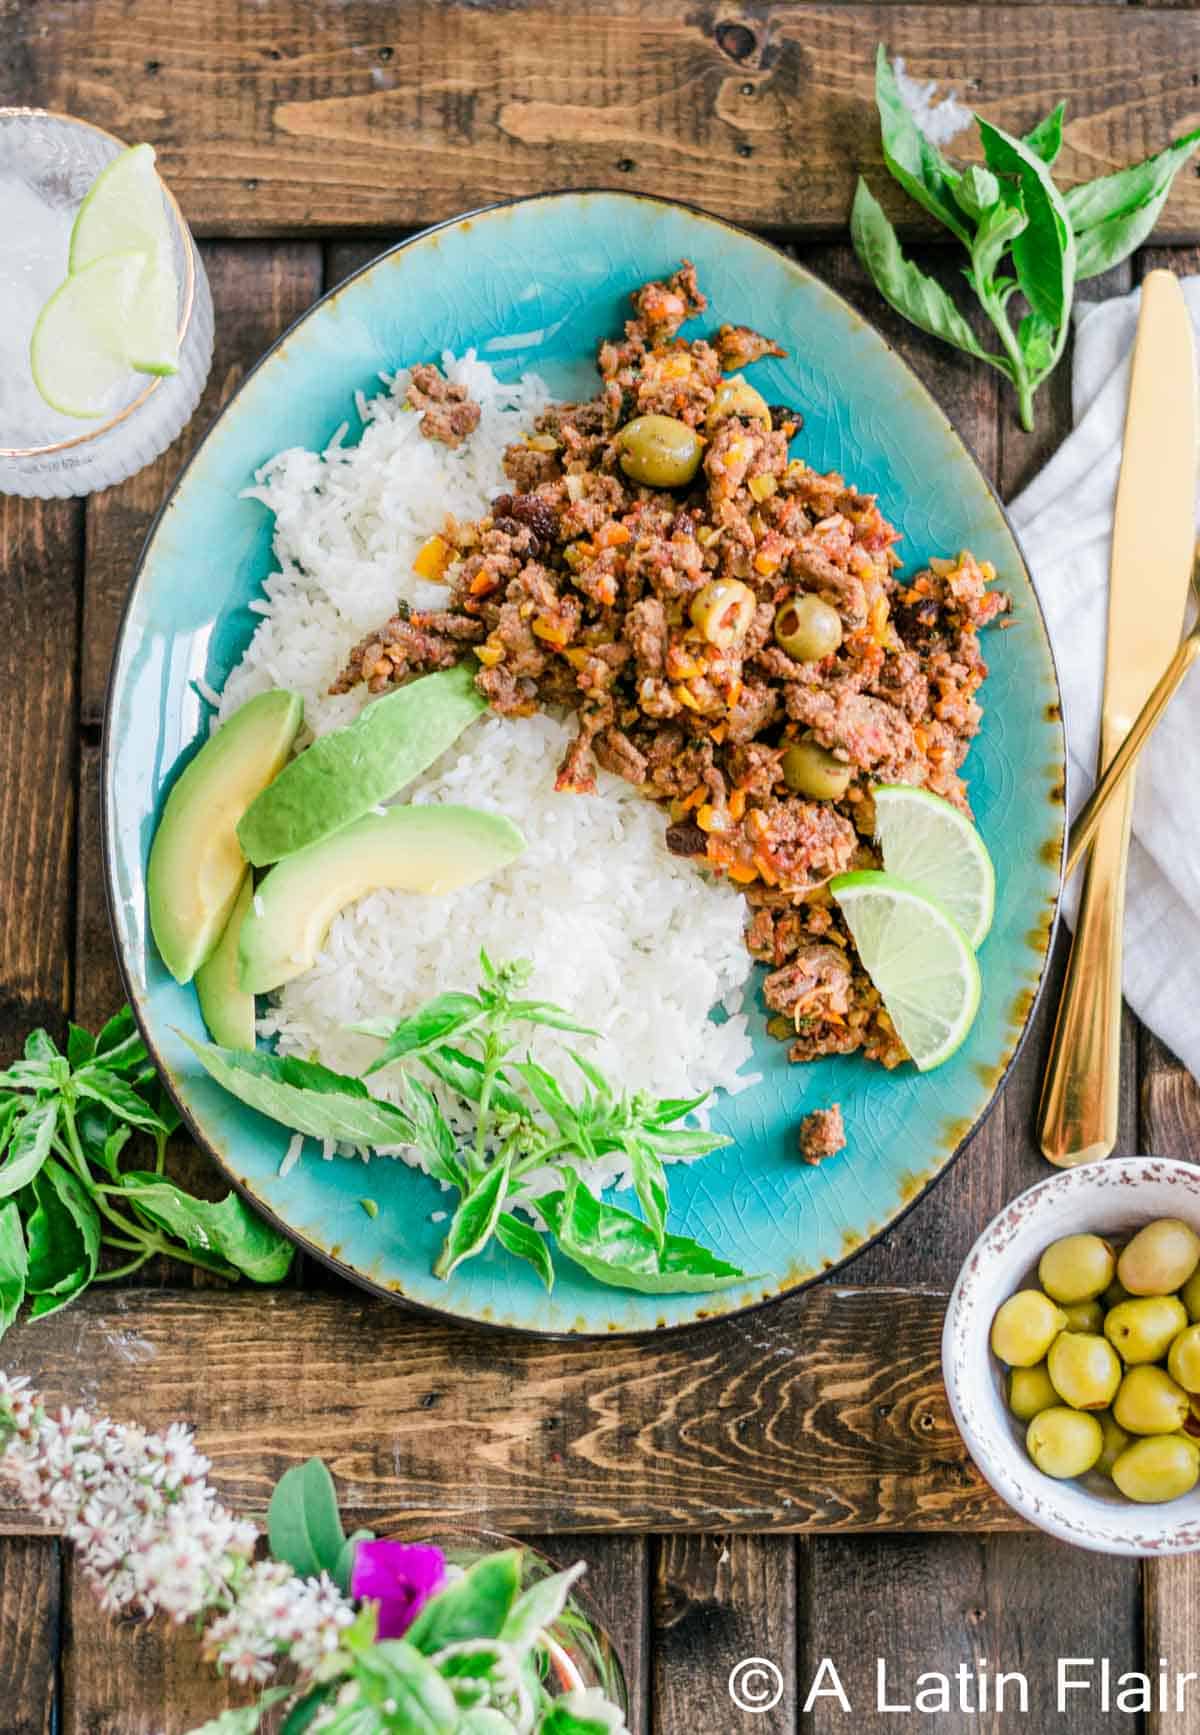 Puerto-rican-picadillo-recipe-served-on-blue-plate